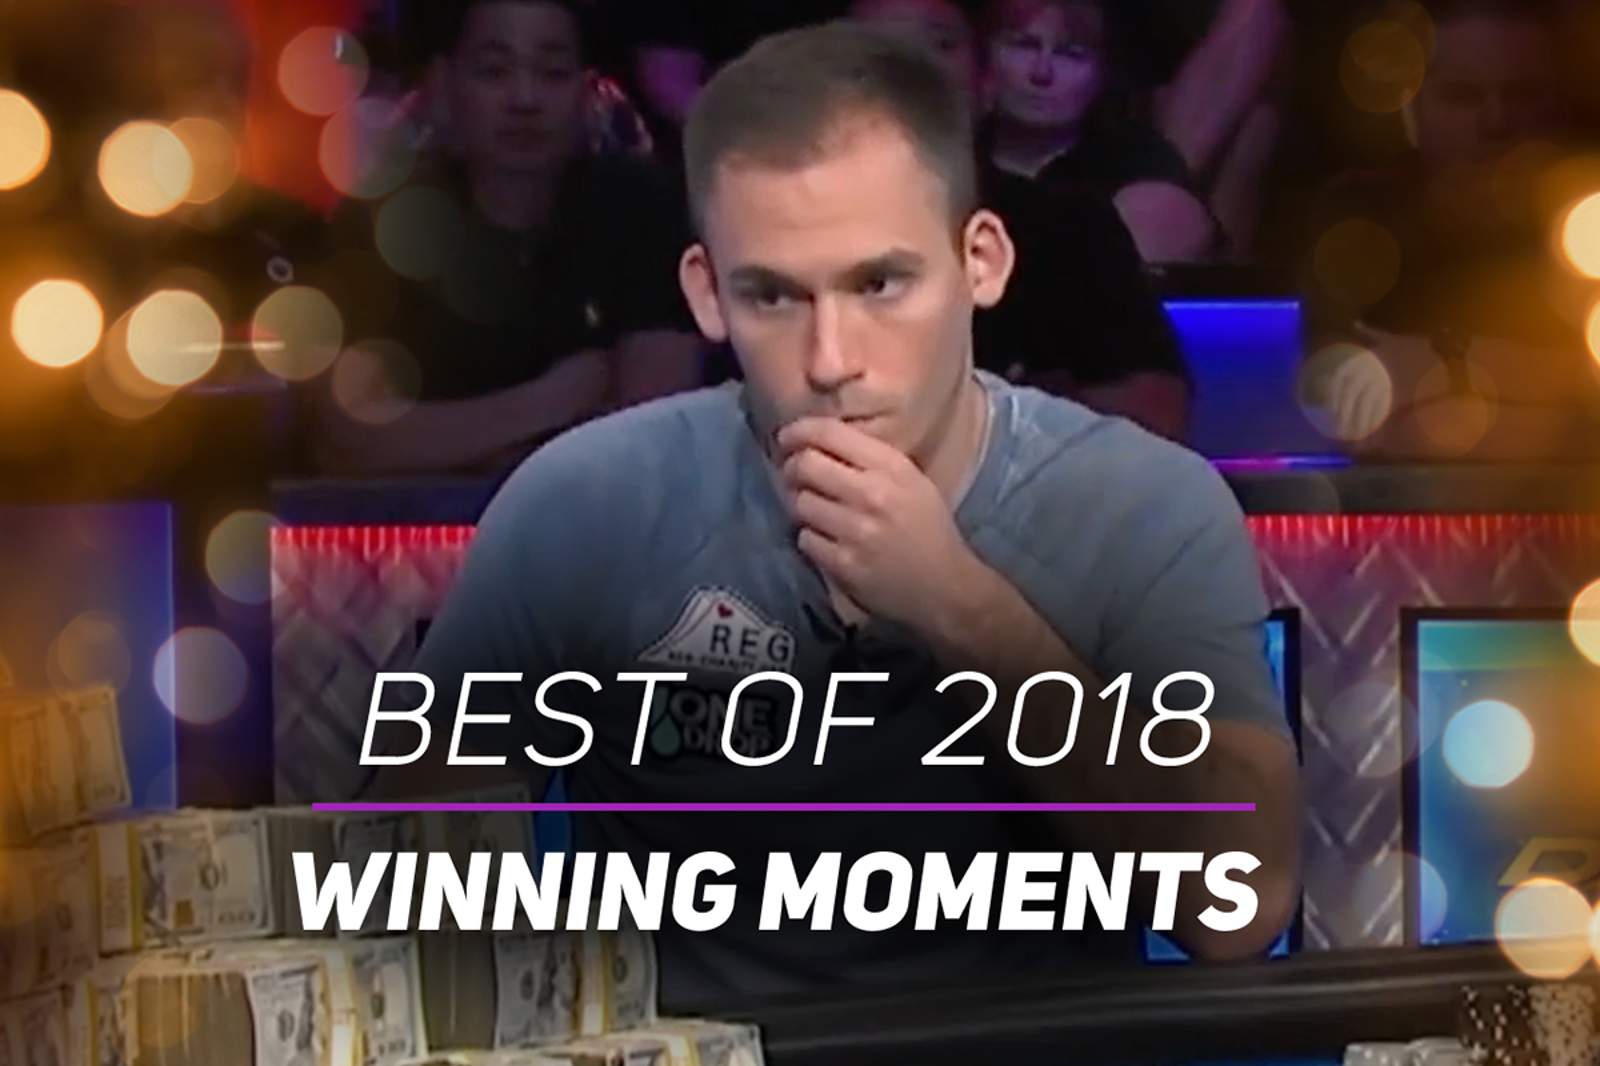 Watch The Best Winning Moments From 2018 on PokerGO Now